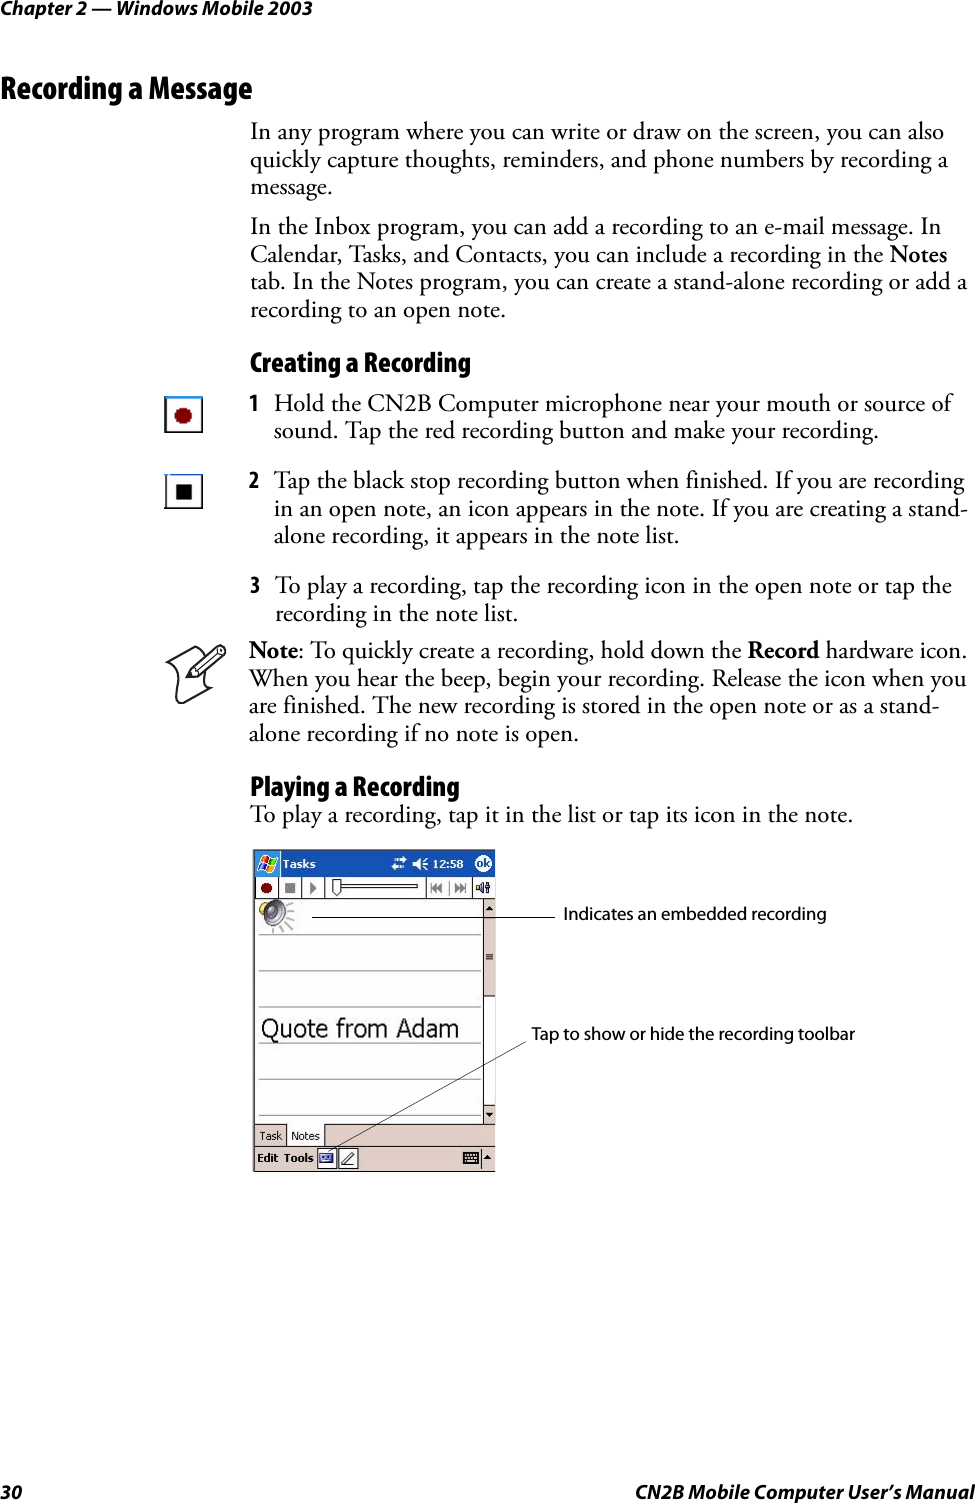 Chapter 2 — Windows Mobile 200330 CN2B Mobile Computer User’s ManualRecording a MessageIn any program where you can write or draw on the screen, you can also quickly capture thoughts, reminders, and phone numbers by recording a message. In the Inbox program, you can add a recording to an e-mail message. In Calendar, Tasks, and Contacts, you can include a recording in the Notes tab. In the Notes program, you can create a stand-alone recording or add a recording to an open note.Creating a Recording3To play a recording, tap the recording icon in the open note or tap the recording in the note list.Playing a RecordingTo play a recording, tap it in the list or tap its icon in the note.1Hold the CN2B Computer microphone near your mouth or source of sound. Tap the red recording button and make your recording.2Tap the black stop recording button when finished. If you are recording in an open note, an icon appears in the note. If you are creating a stand-alone recording, it appears in the note list.Note: To quickly create a recording, hold down the Record hardware icon. When you hear the beep, begin your recording. Release the icon when you are finished. The new recording is stored in the open note or as a stand-alone recording if no note is open.Indicates an embedded recordingTap to show or hide the recording toolbar